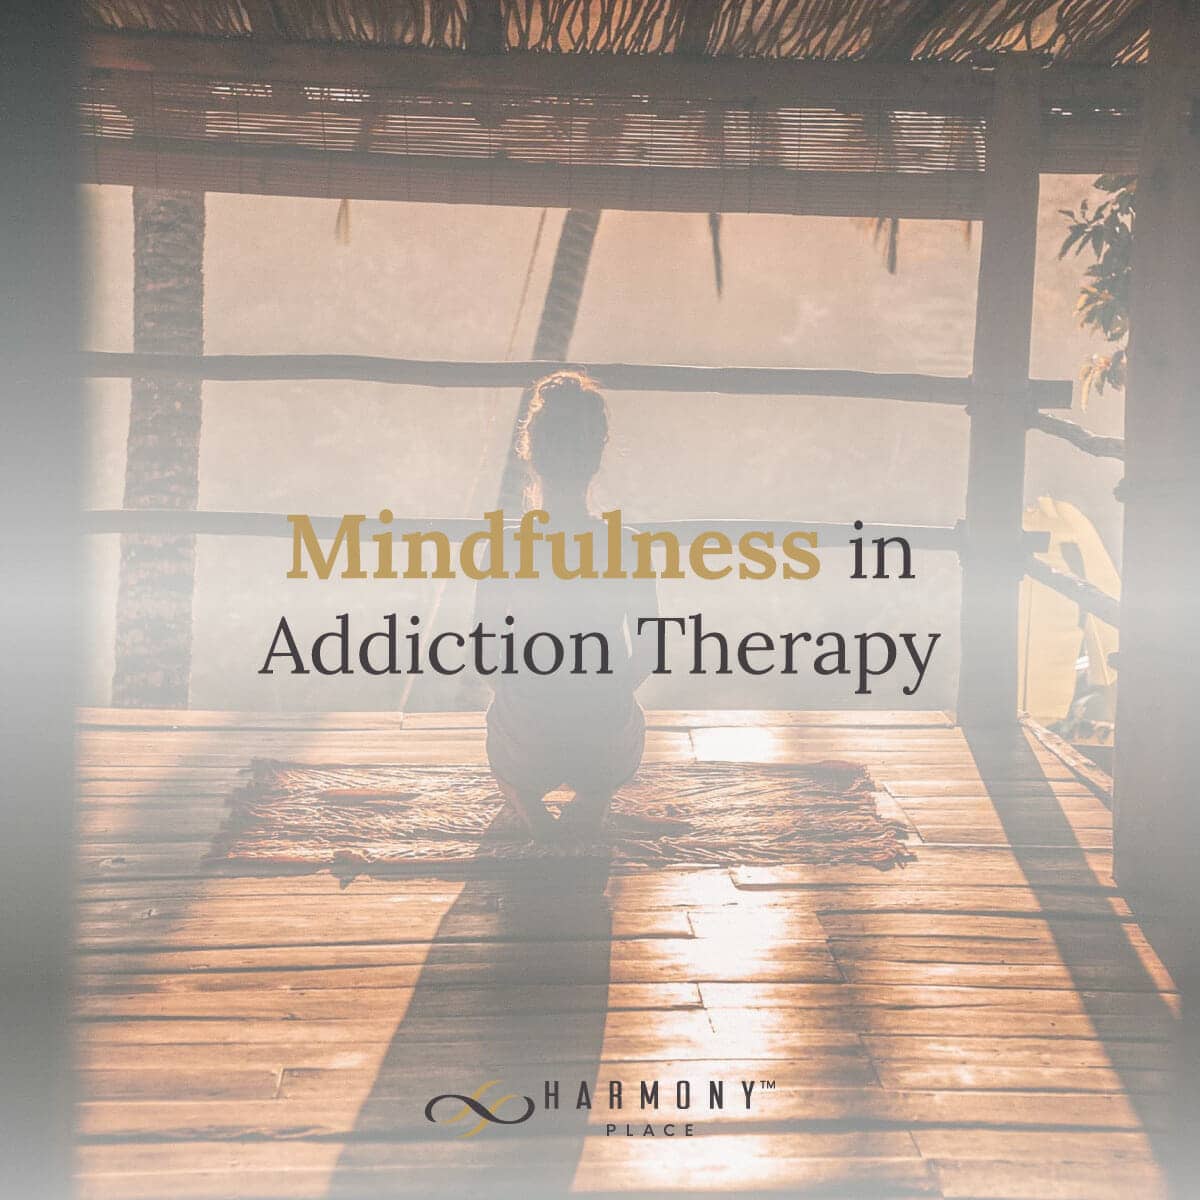 How Does Mindfulness Help With Addiction Treatment And Recovery